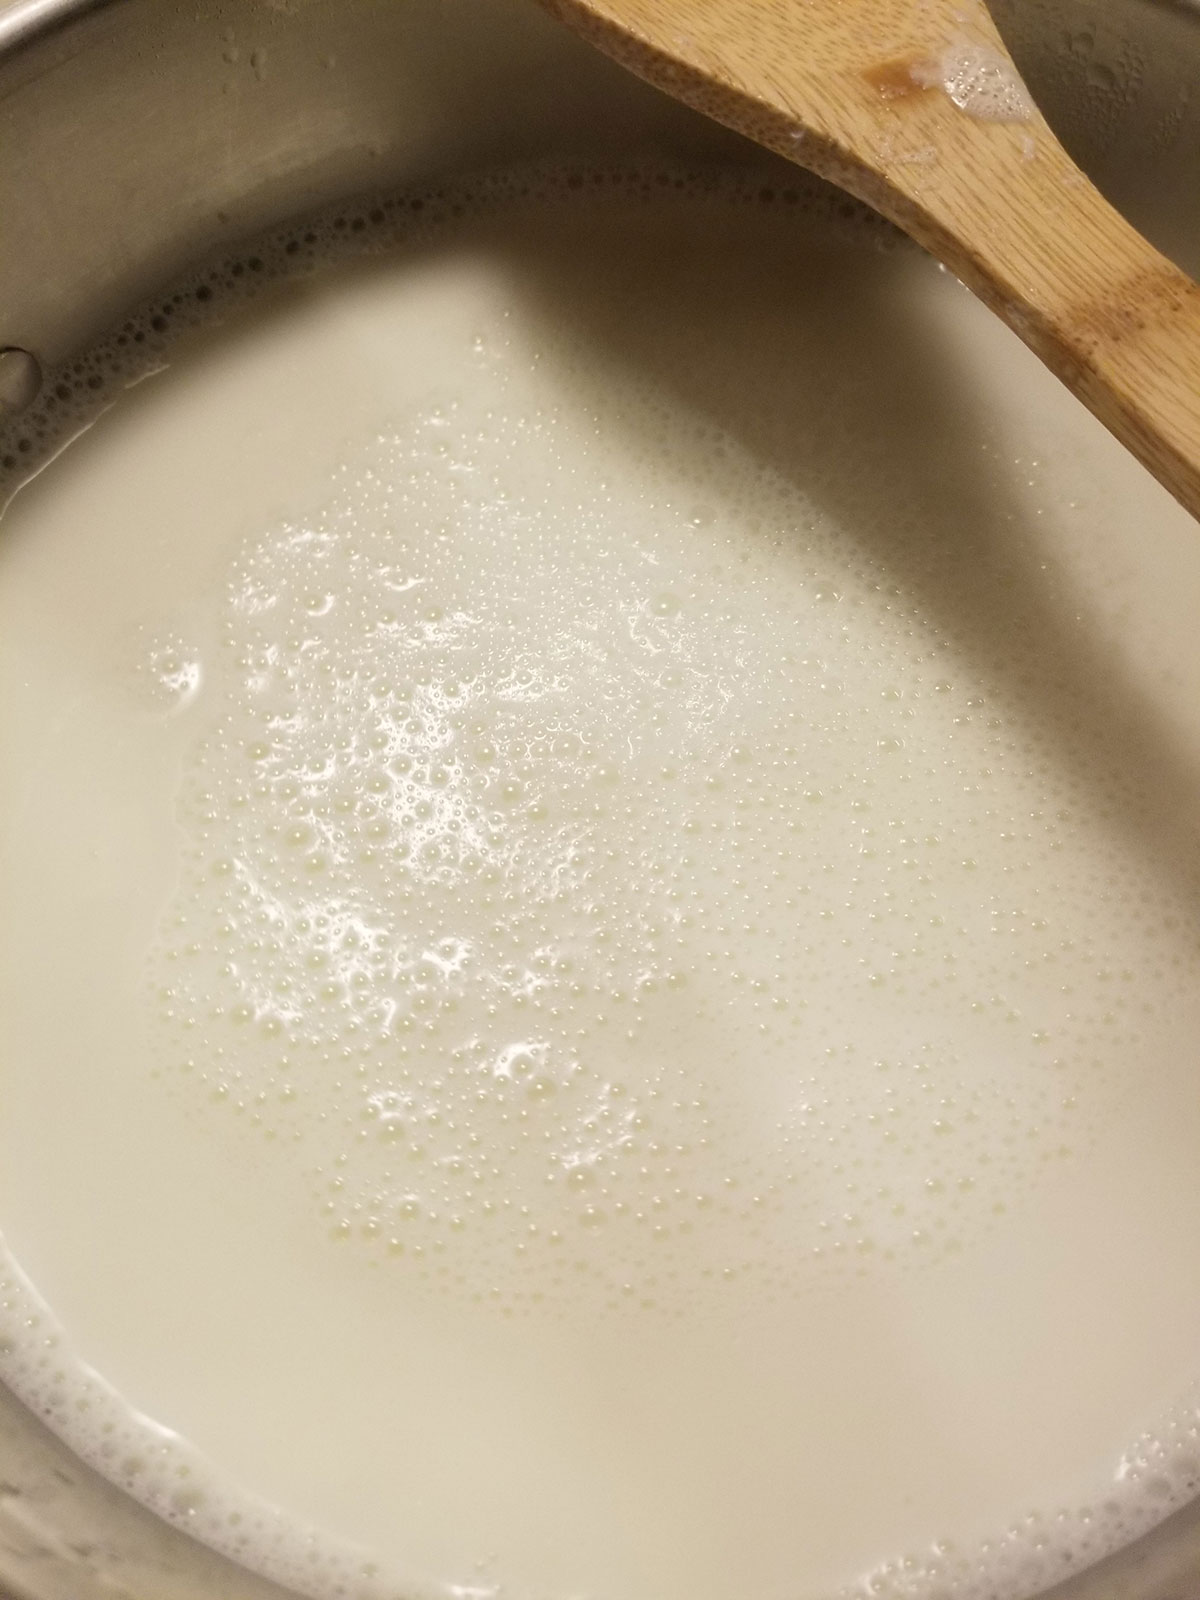 Bubbles form when the yogurt reaches between 170-180°F